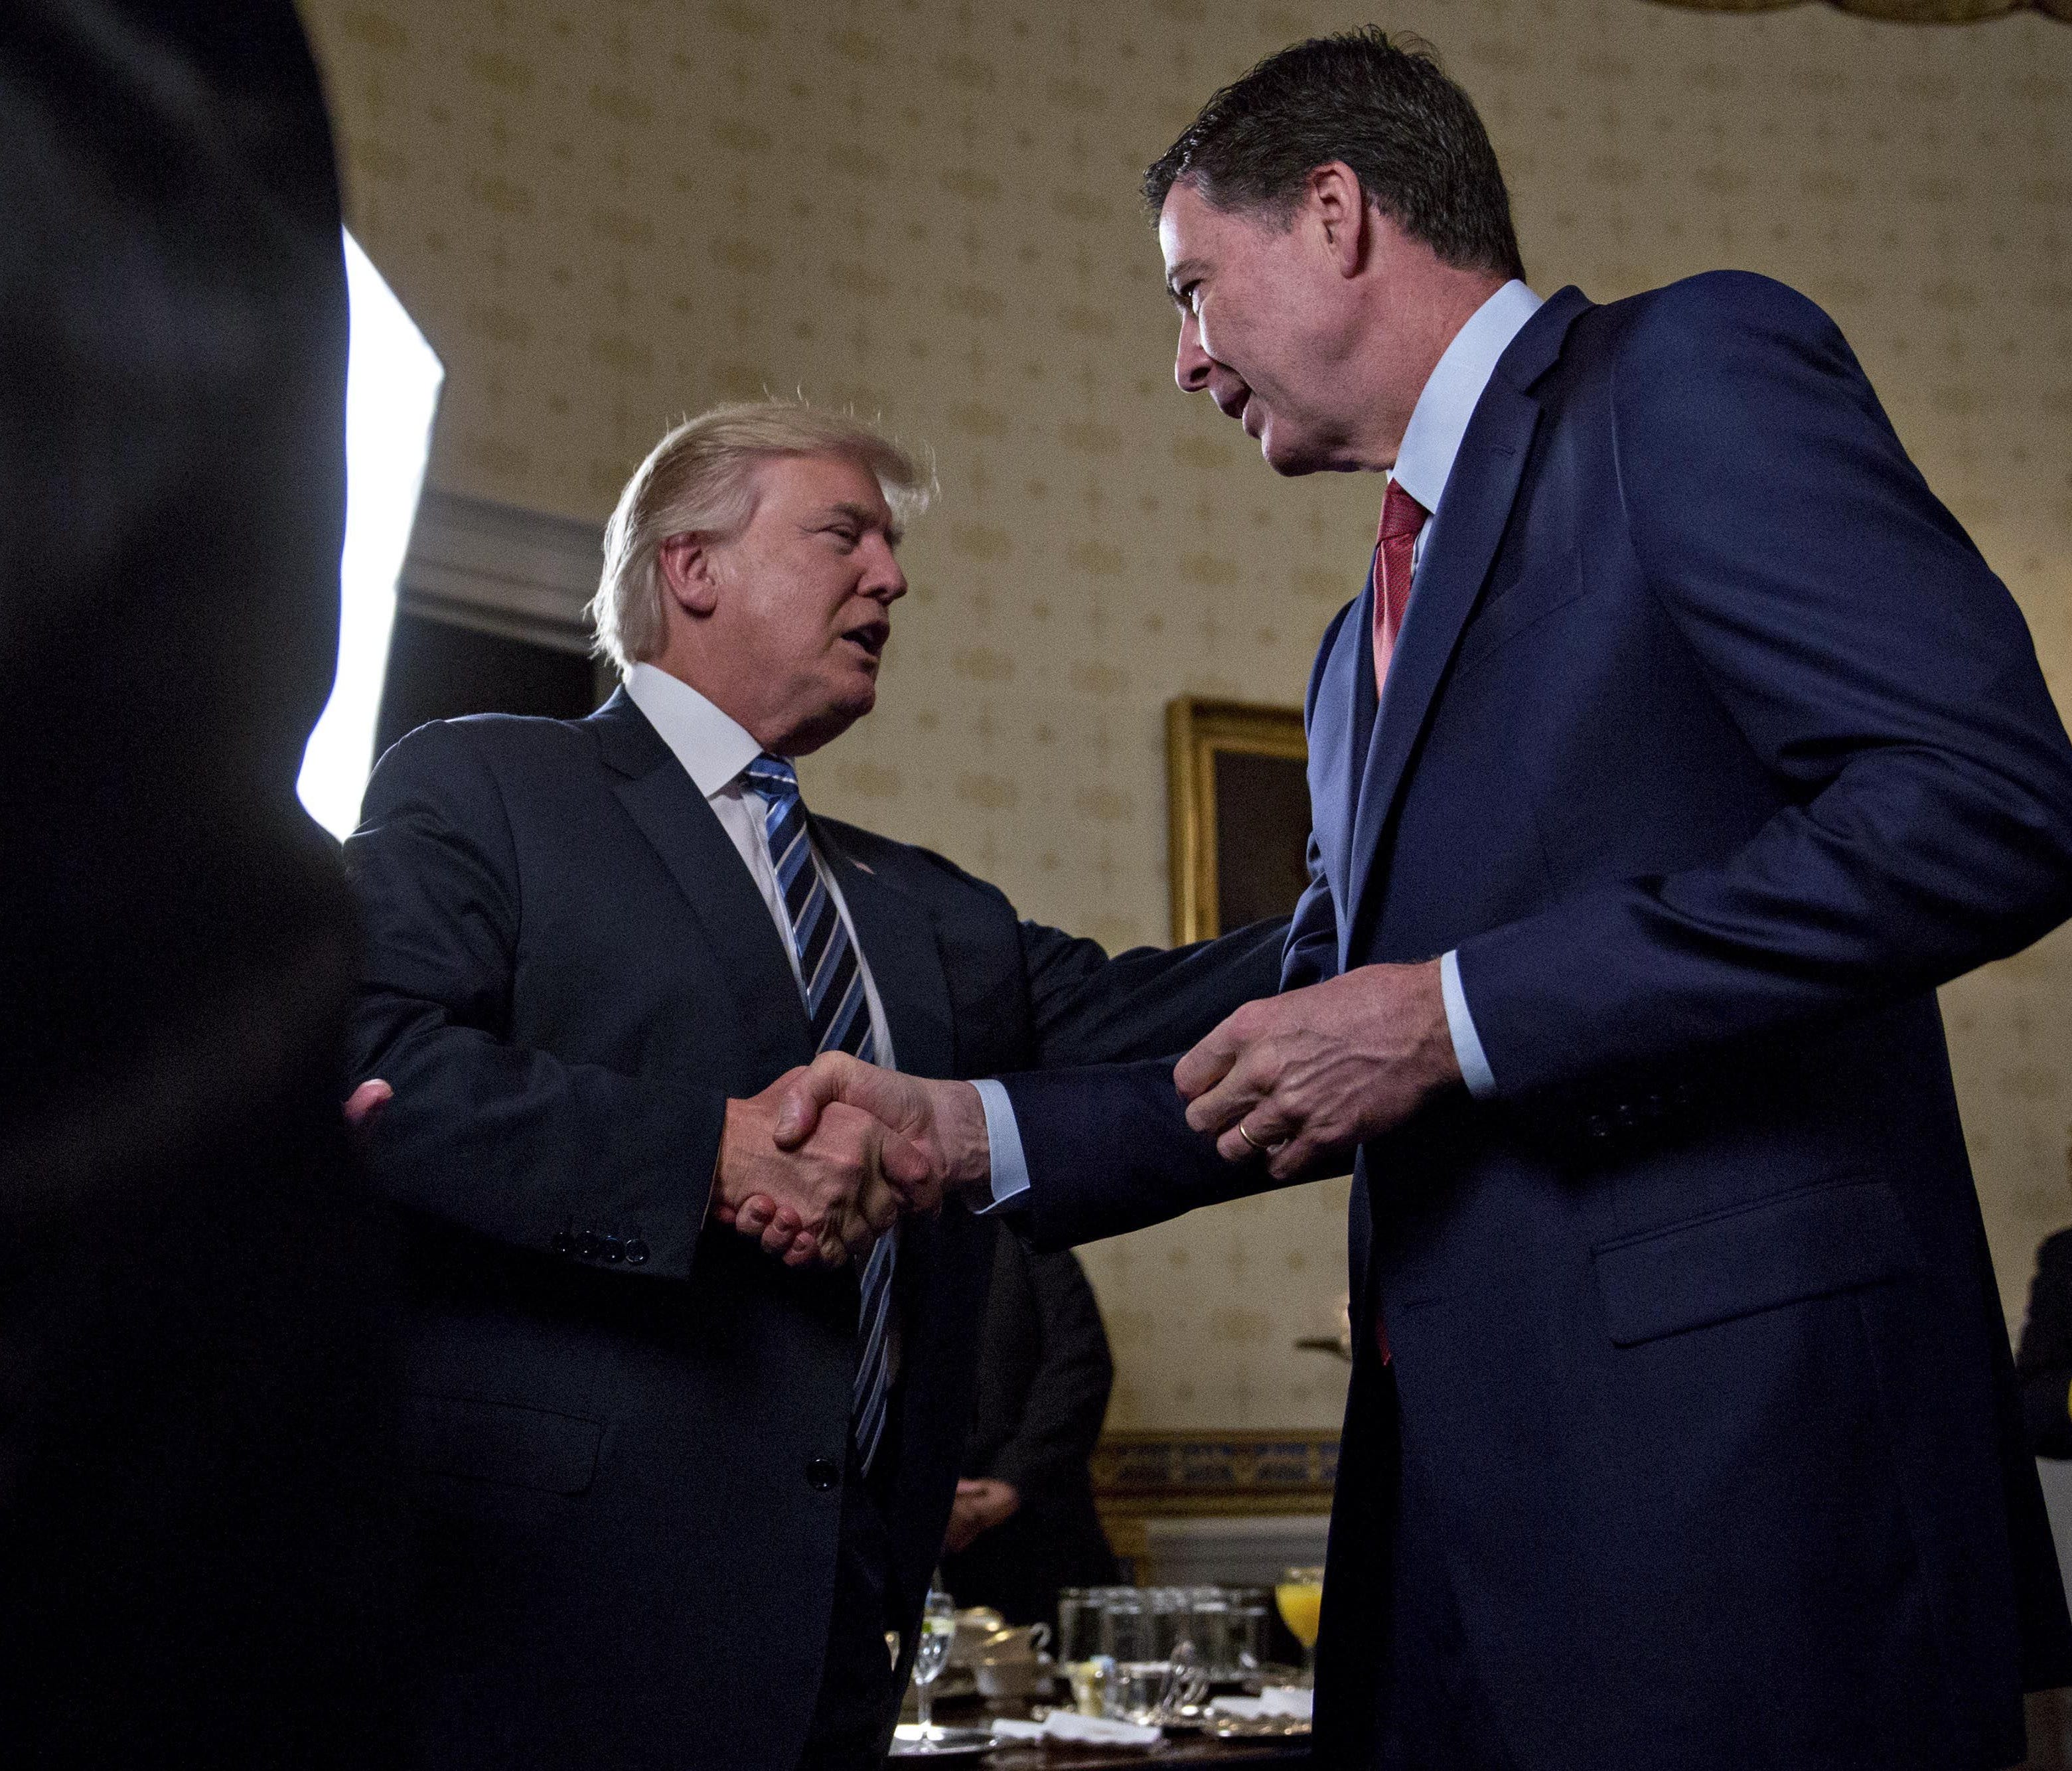 President Trump shakes hands with FBI Director James Comey during an Inaugural Law Enforcement Officers and First Responders Reception at the White House on Jan. 22, 2017.